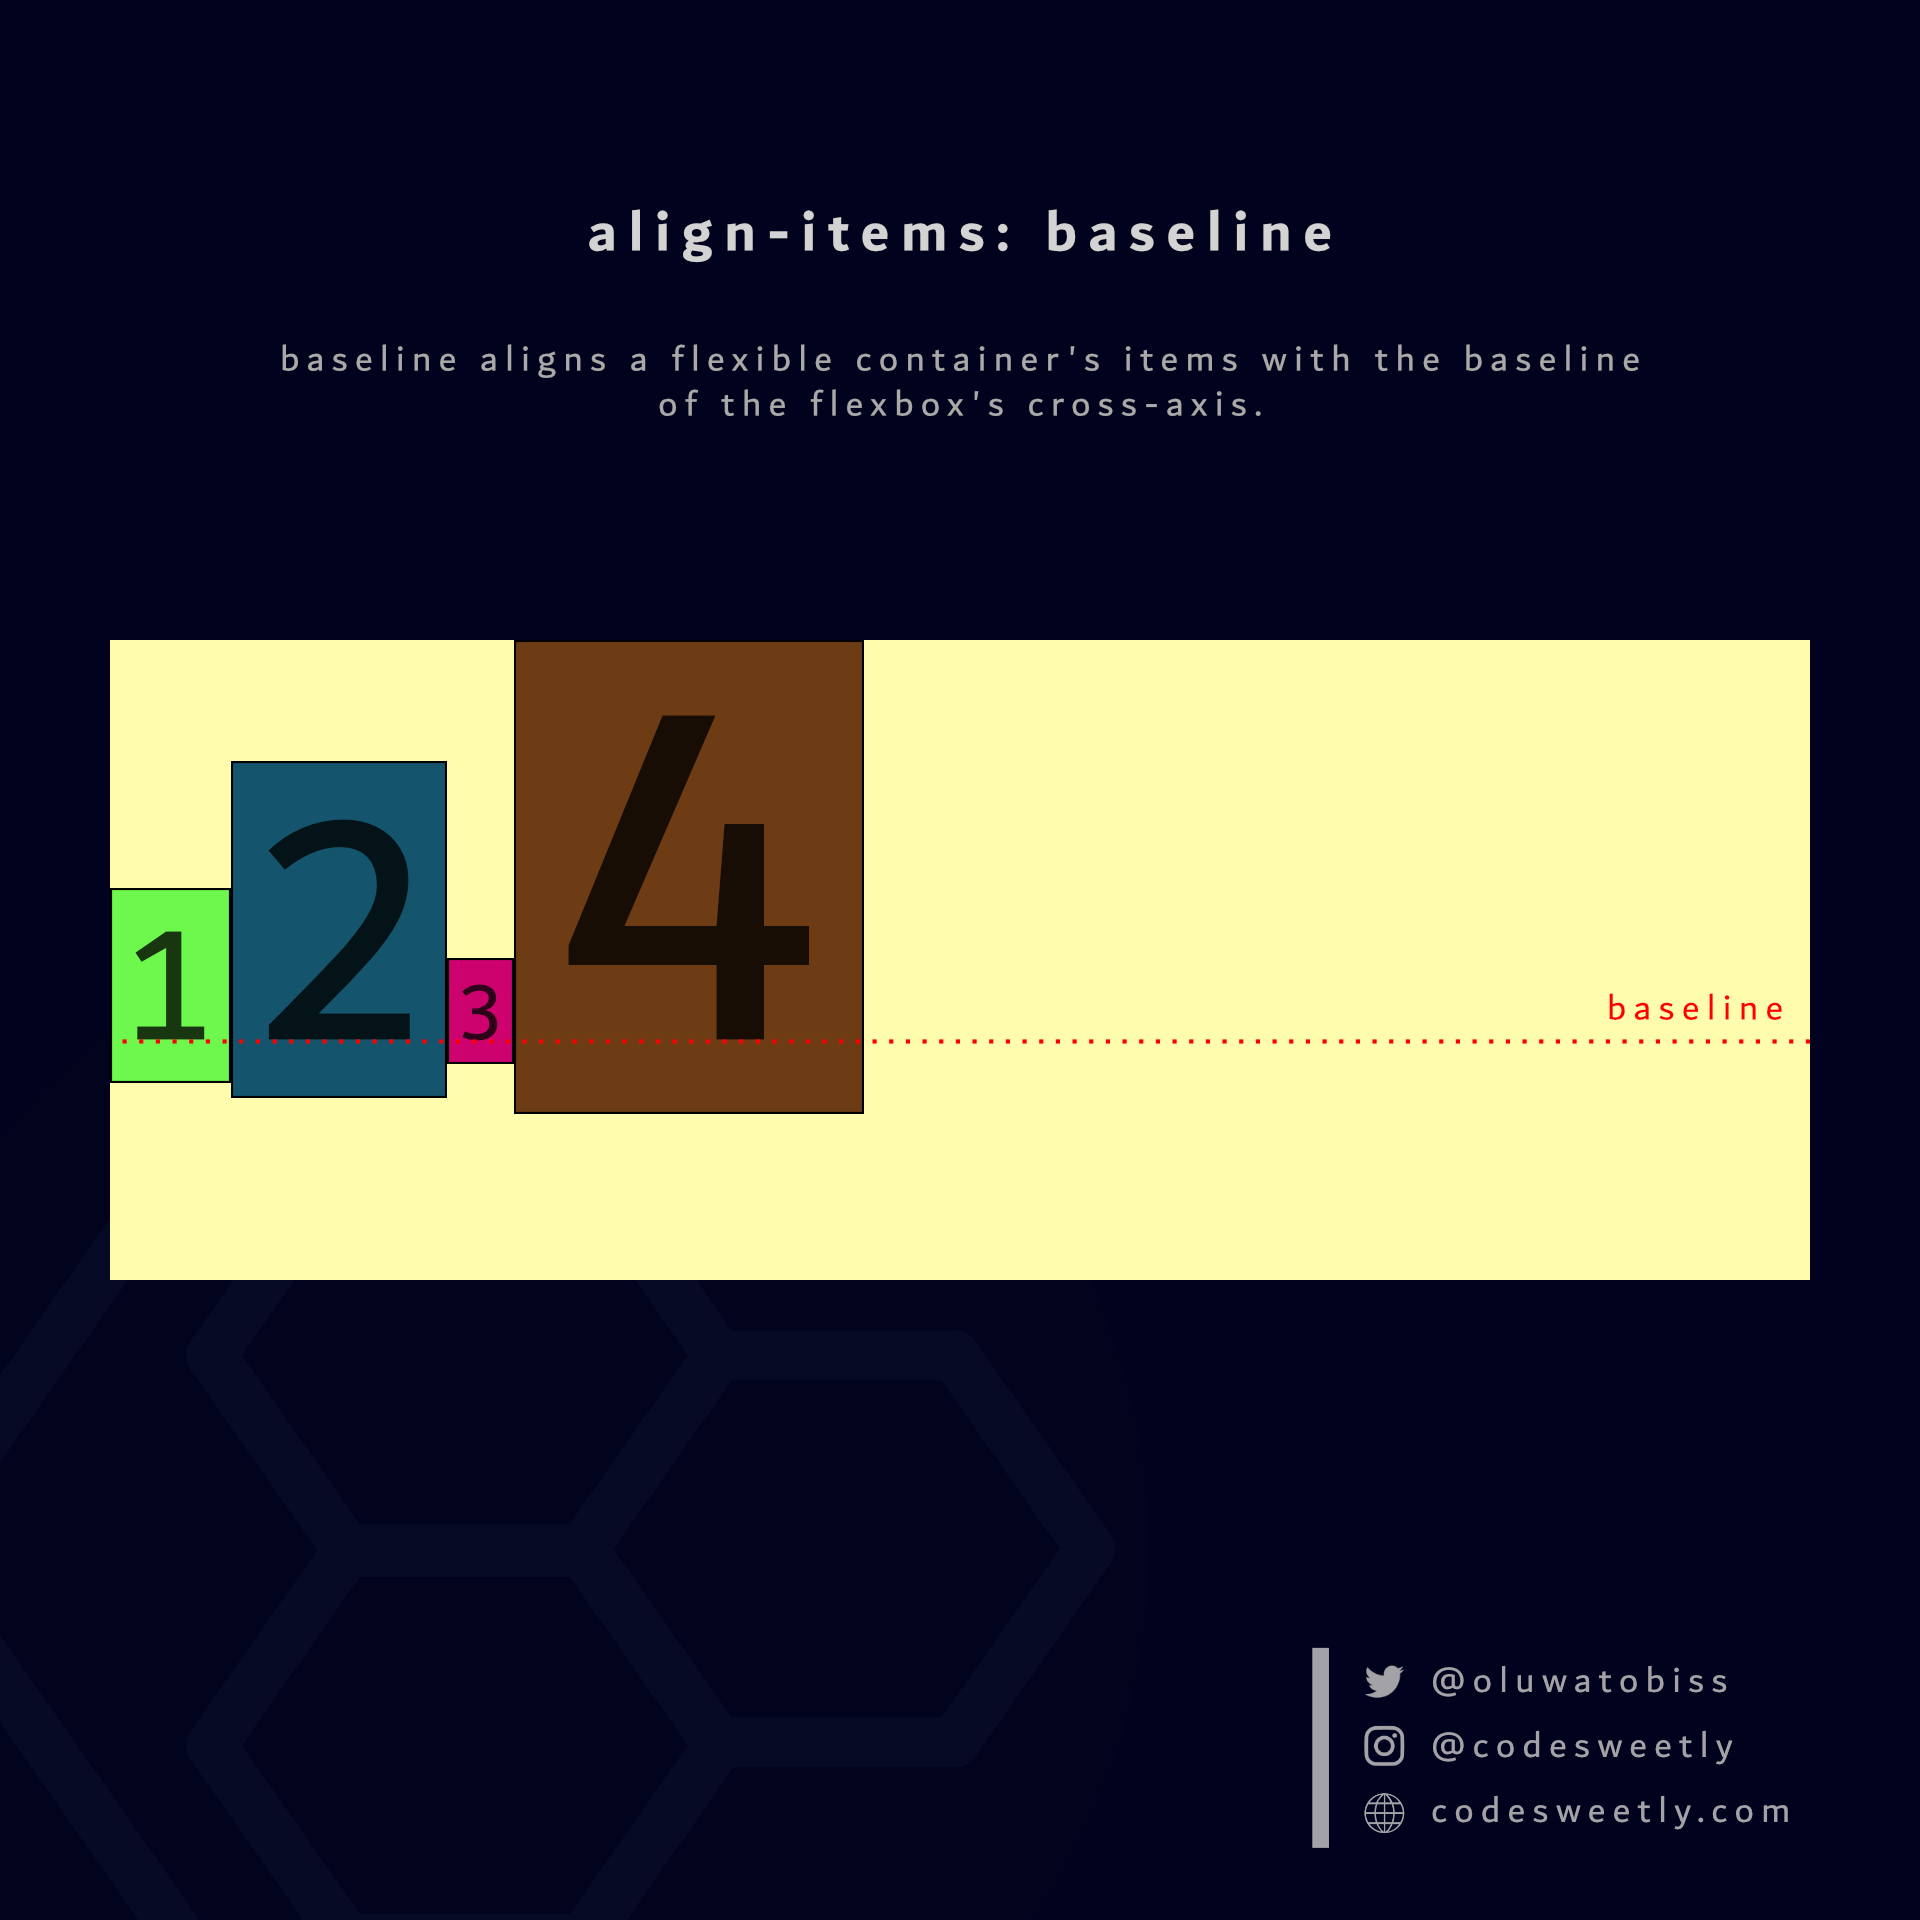 align-items' baseline value aligns flexible items to a flexbox's baseline